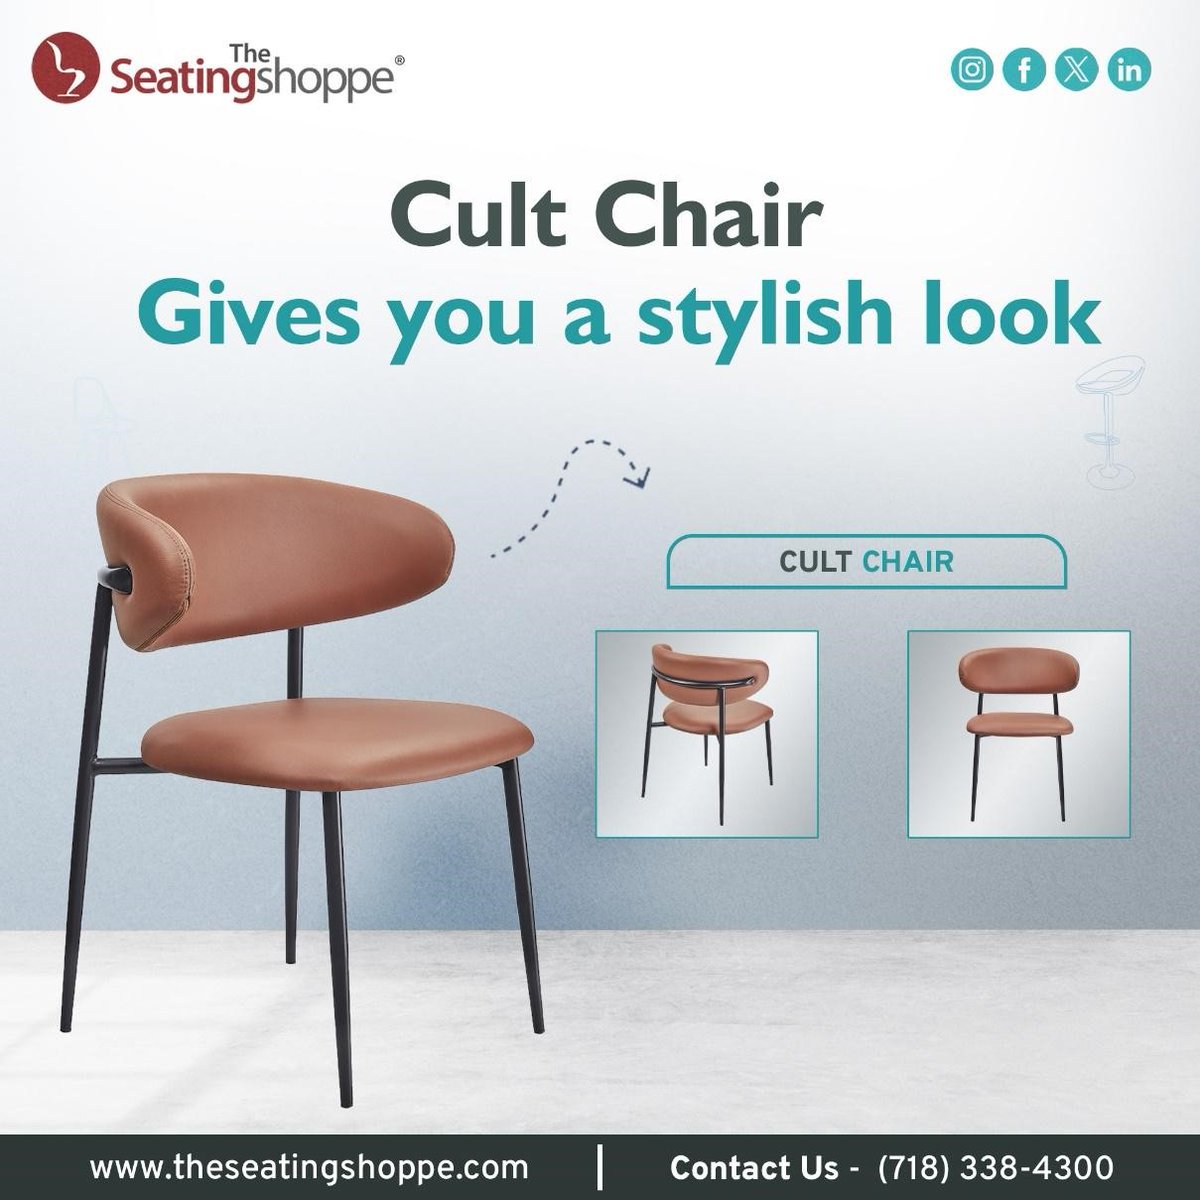 Unveil the Cult Chair: Blending Style with Comfort! 🪑

Order here: bitly.ws/32zy4

#TheSeatingShoppe #CultChair #ChicDesign #PlushComfort #InteriorStyling #FurnitureInspiration #DesignPossibilities #ElevateYourSpace #HomeDecor